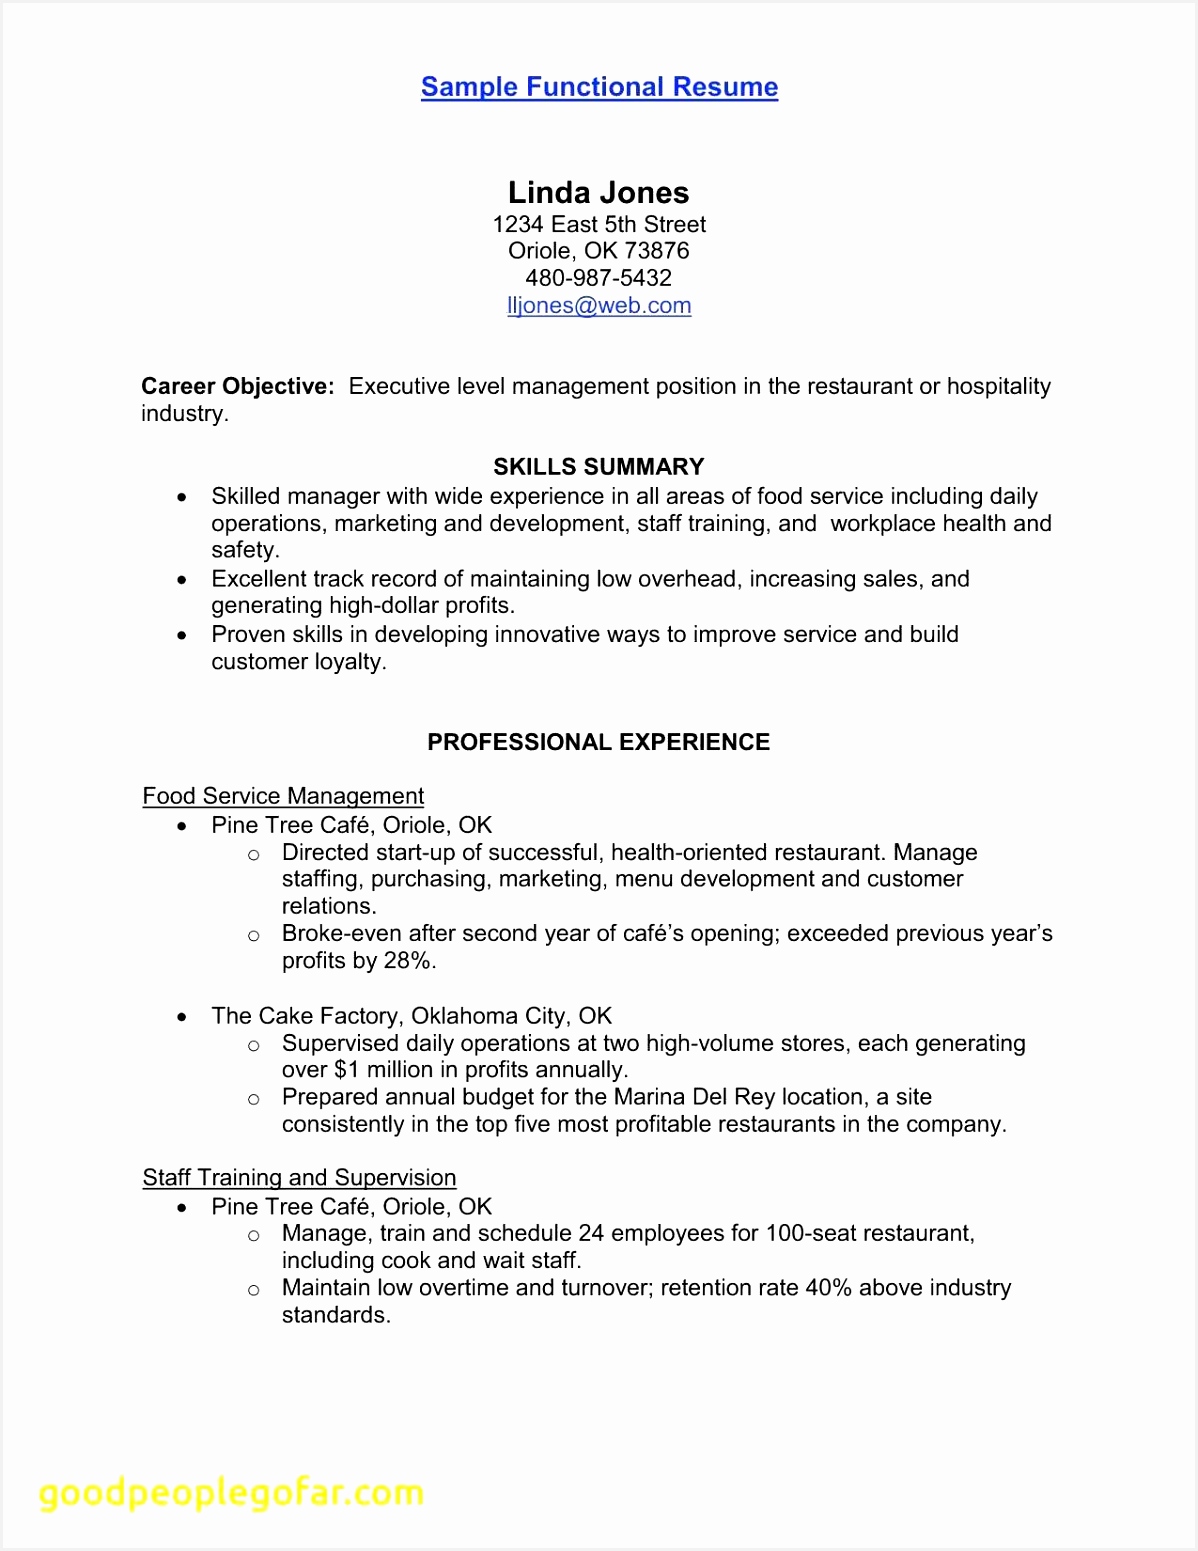 resume for cable installation technician inspirational purchasing technician resume technicians resume new obama resume 0d of 15511198fkrfD